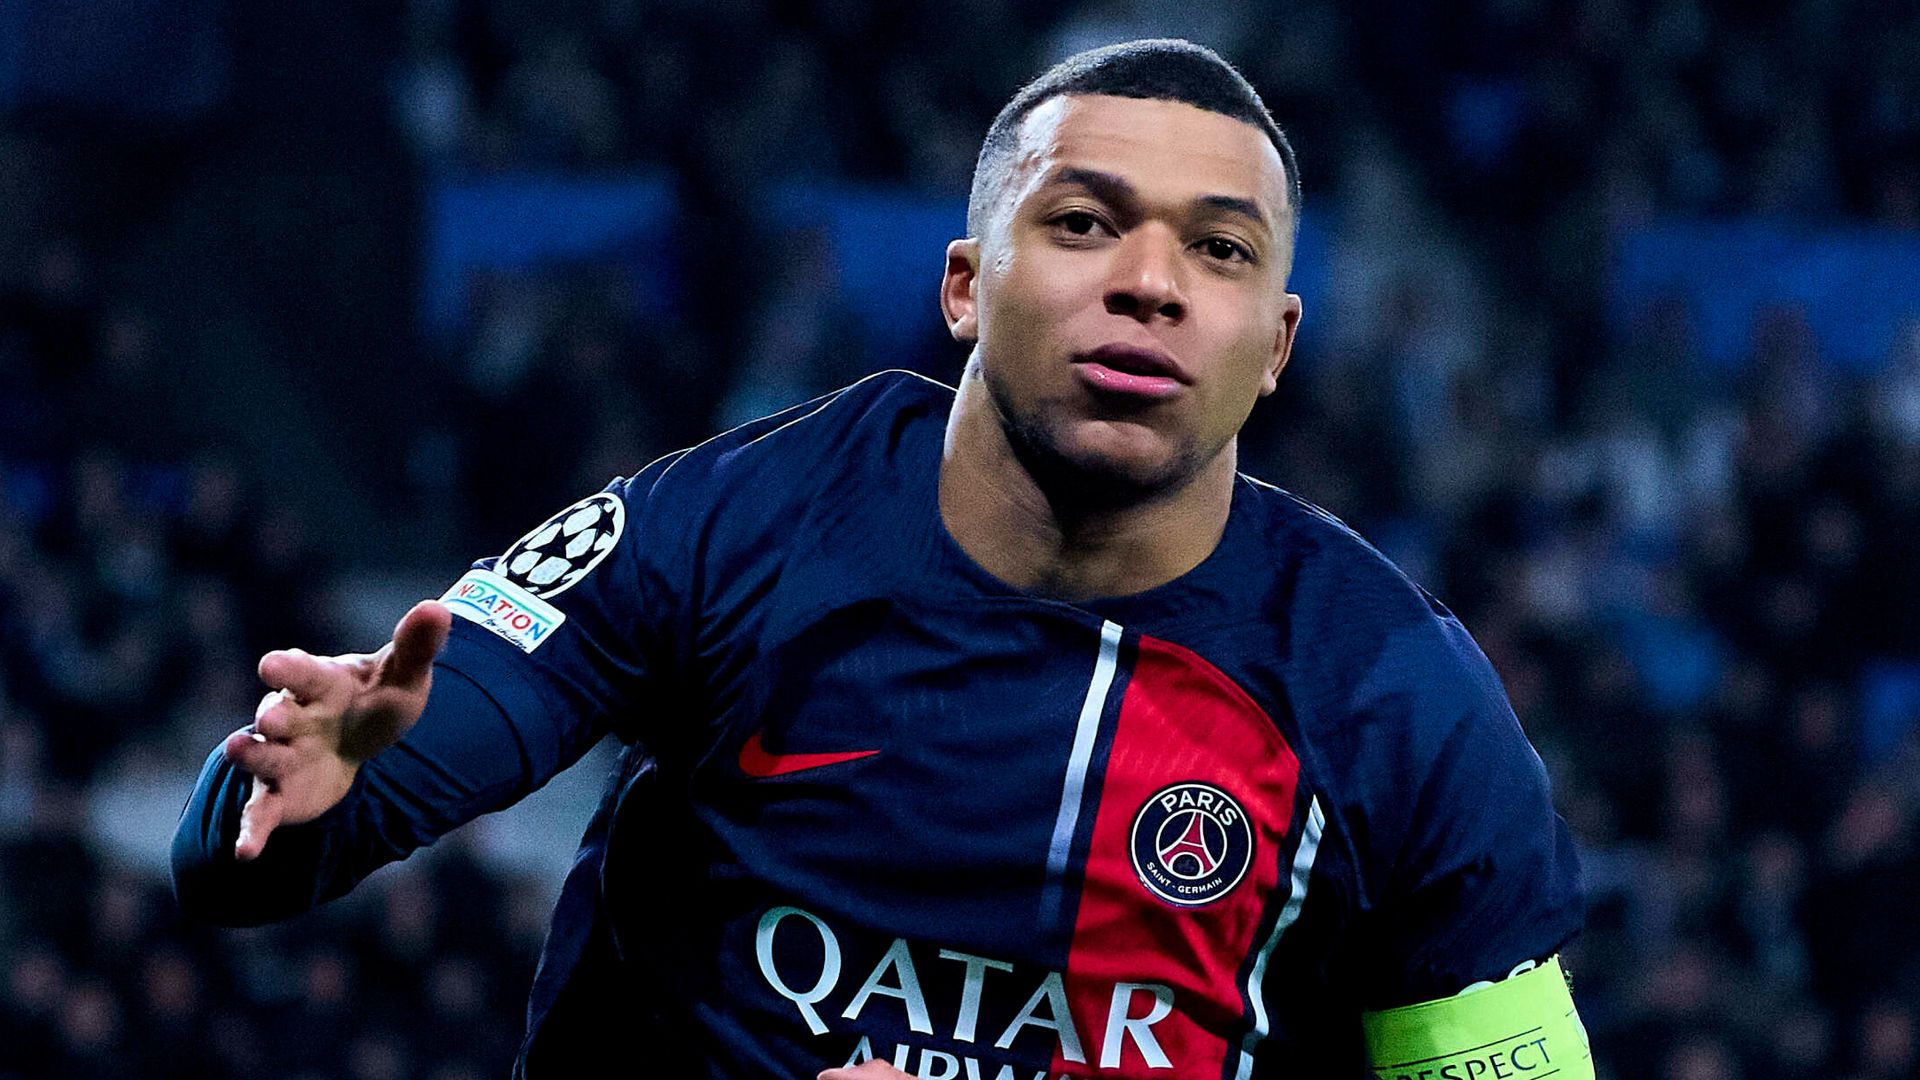 Mbappe confirms PSG exit ahead of expected Real Madrid move